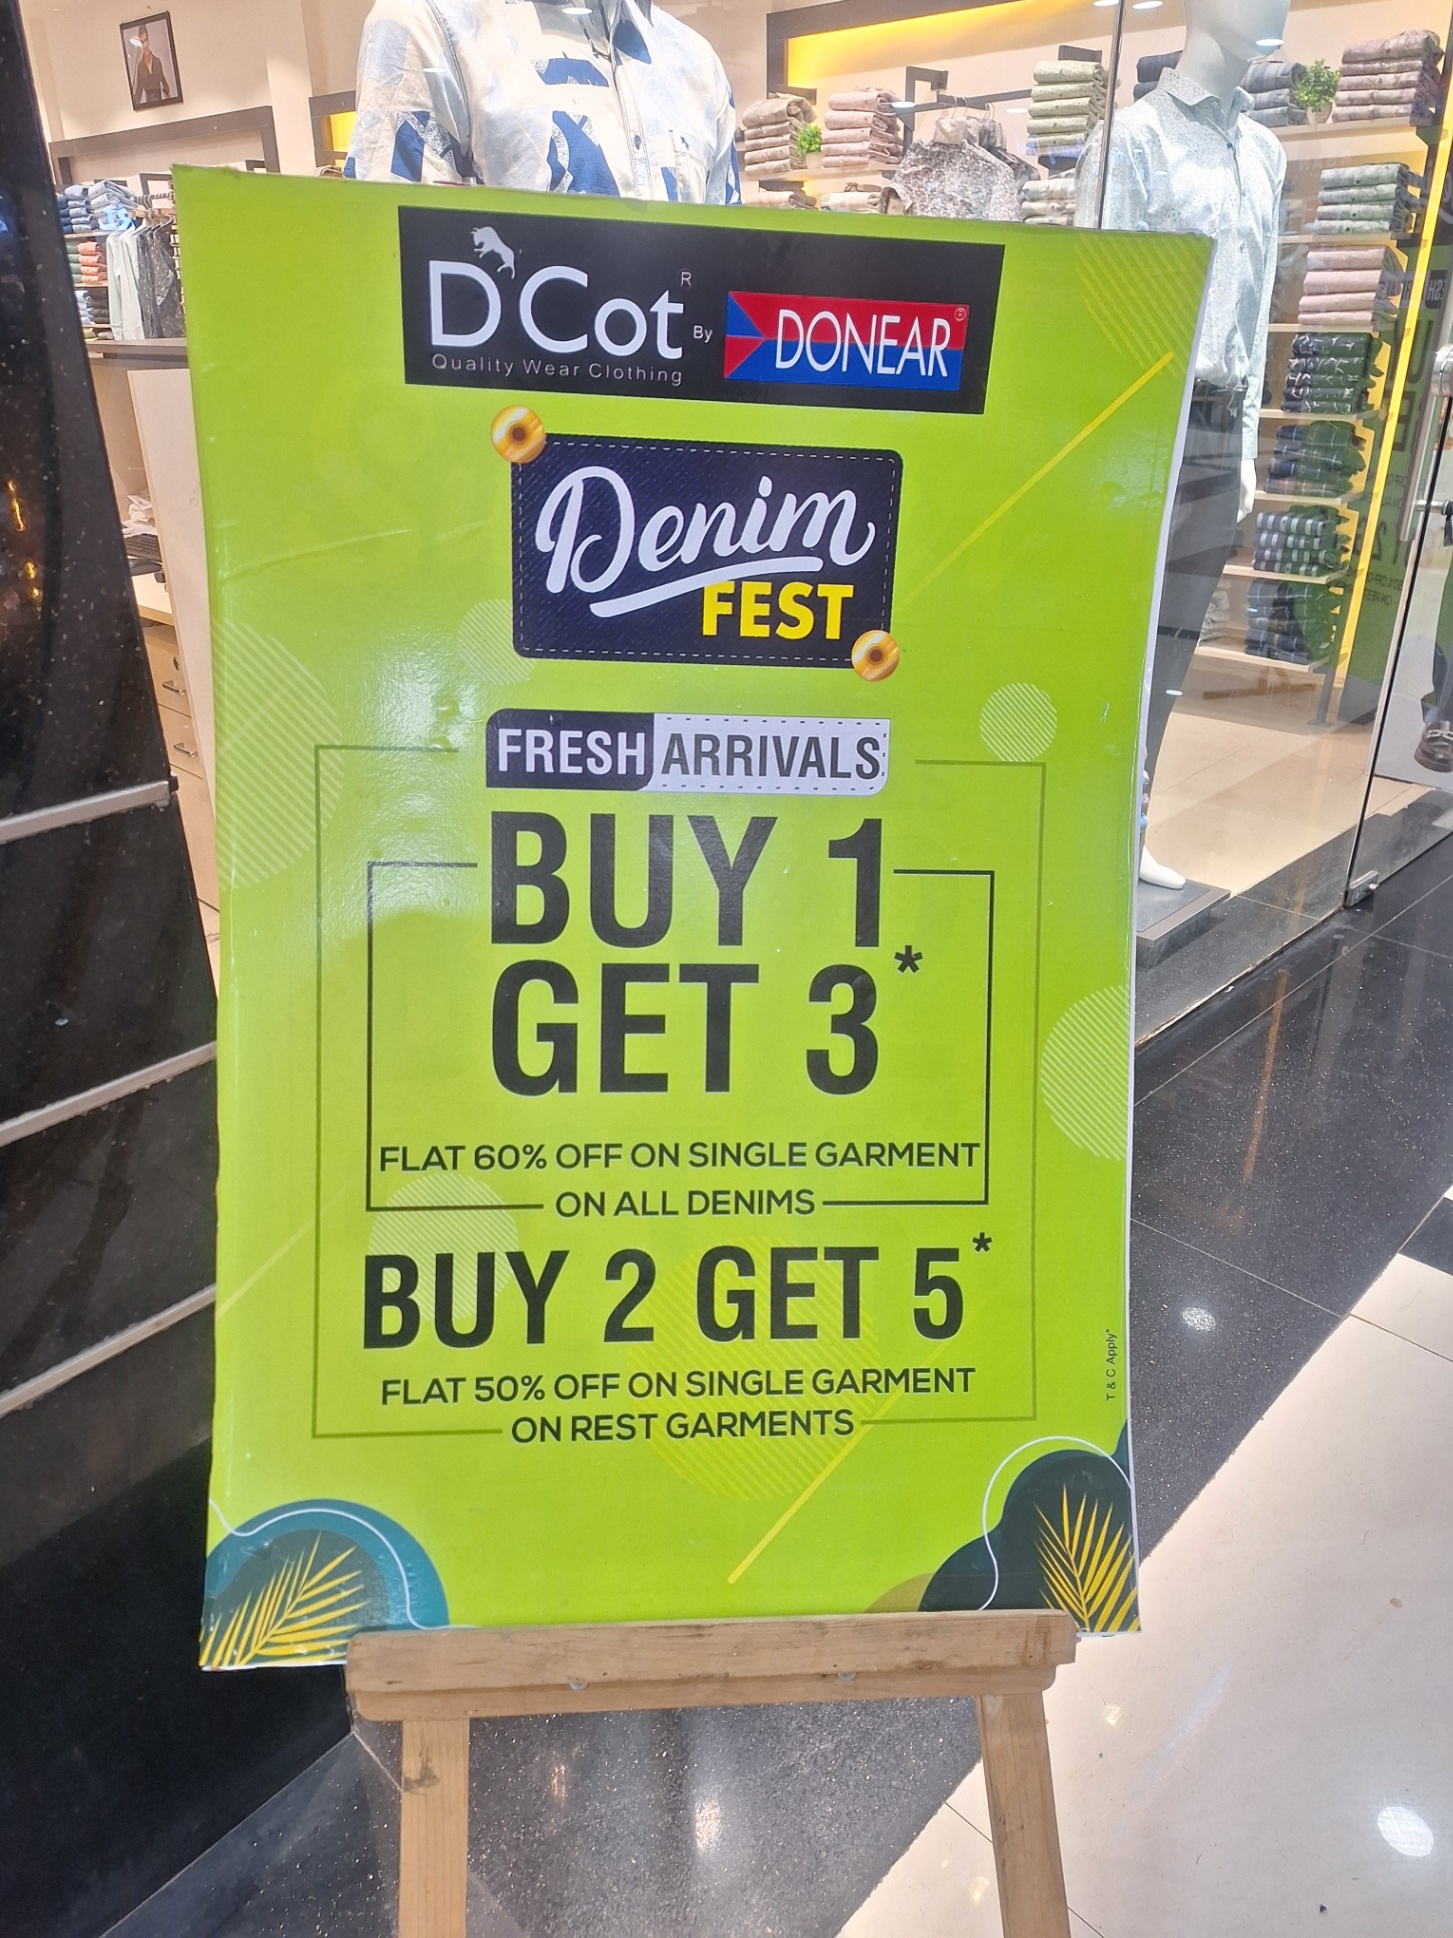 New Deal - Upto 60% Off @D'Cot By Donar, Aashima Mall , Bhopal